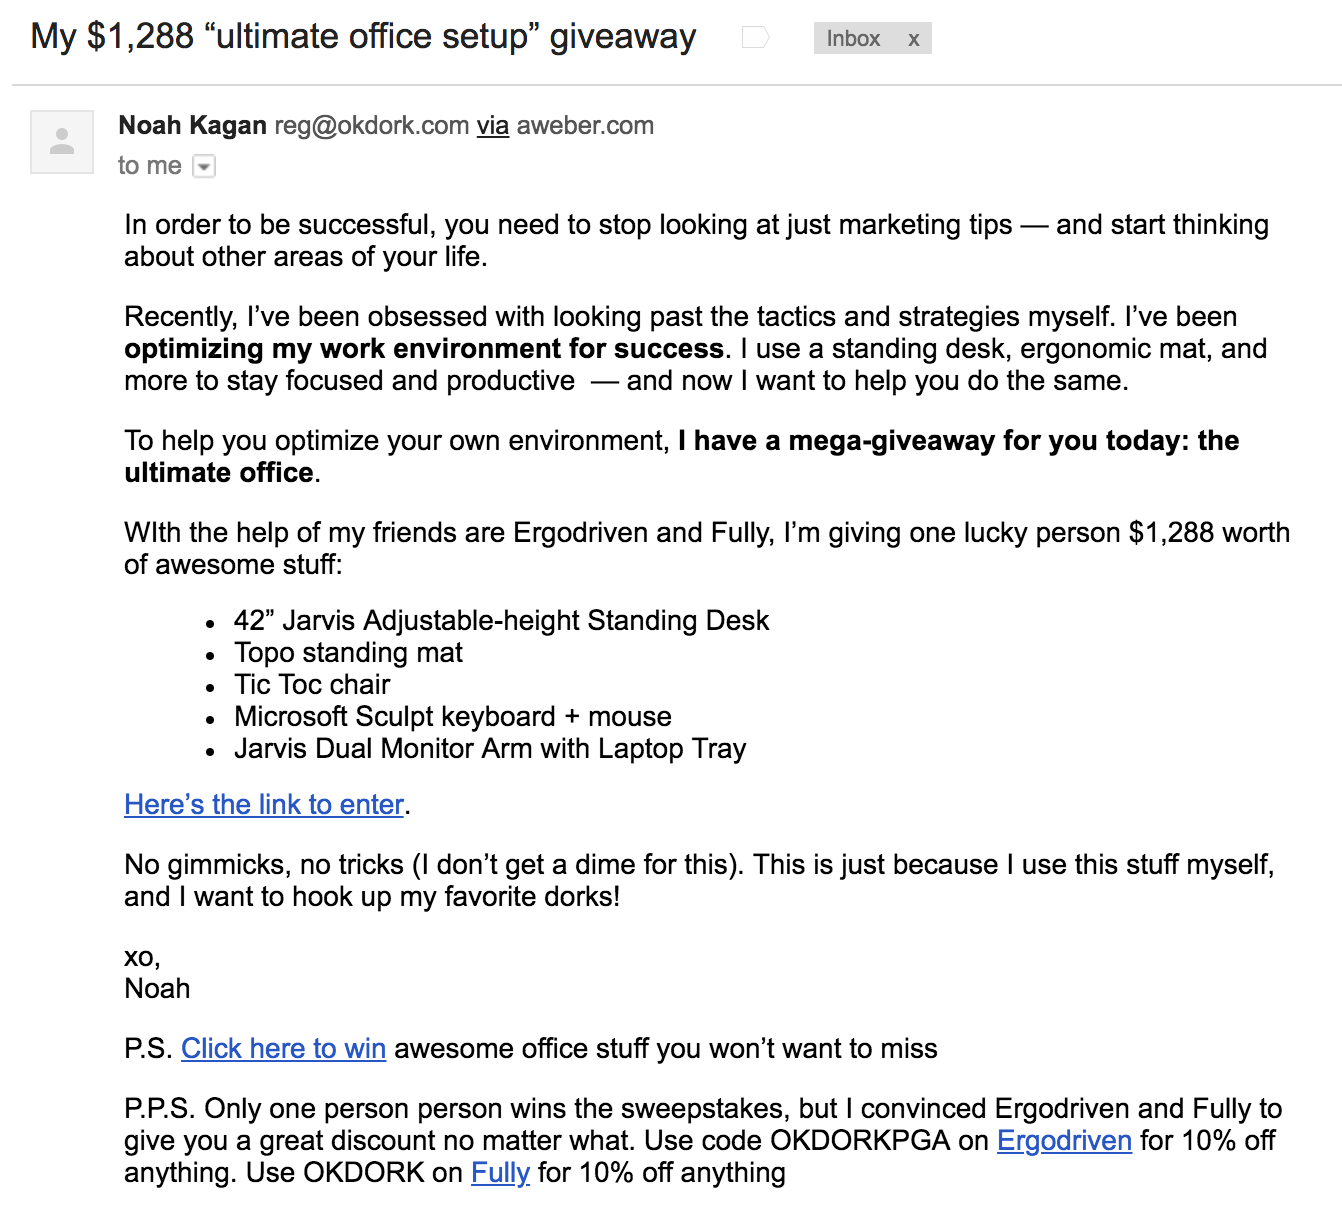 Screenshot showing an email promoting a giveaway